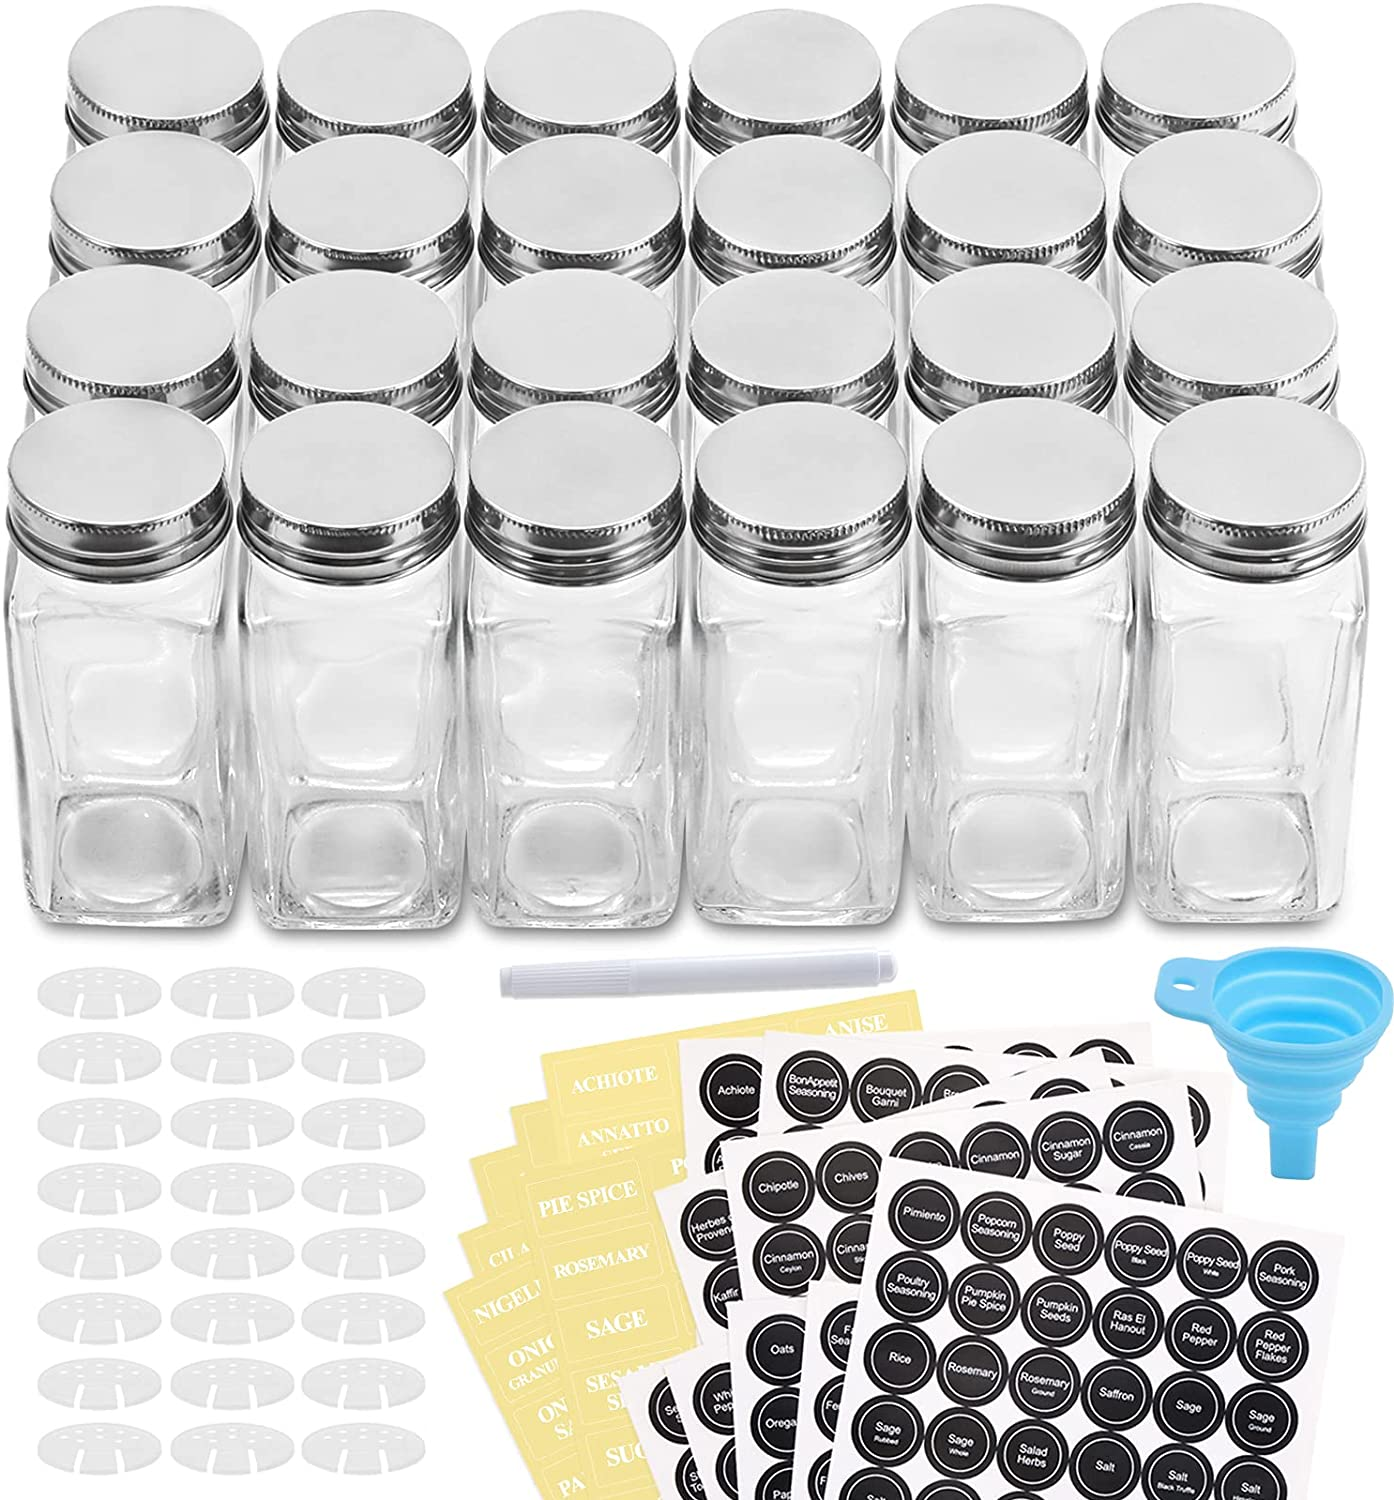  24 Pcs, 40 oz Glass Spice Jars/Bottles With Spice Labels, Shaker Lids & Airtight Metal Caps - Silicone Collapsible Funnel Included